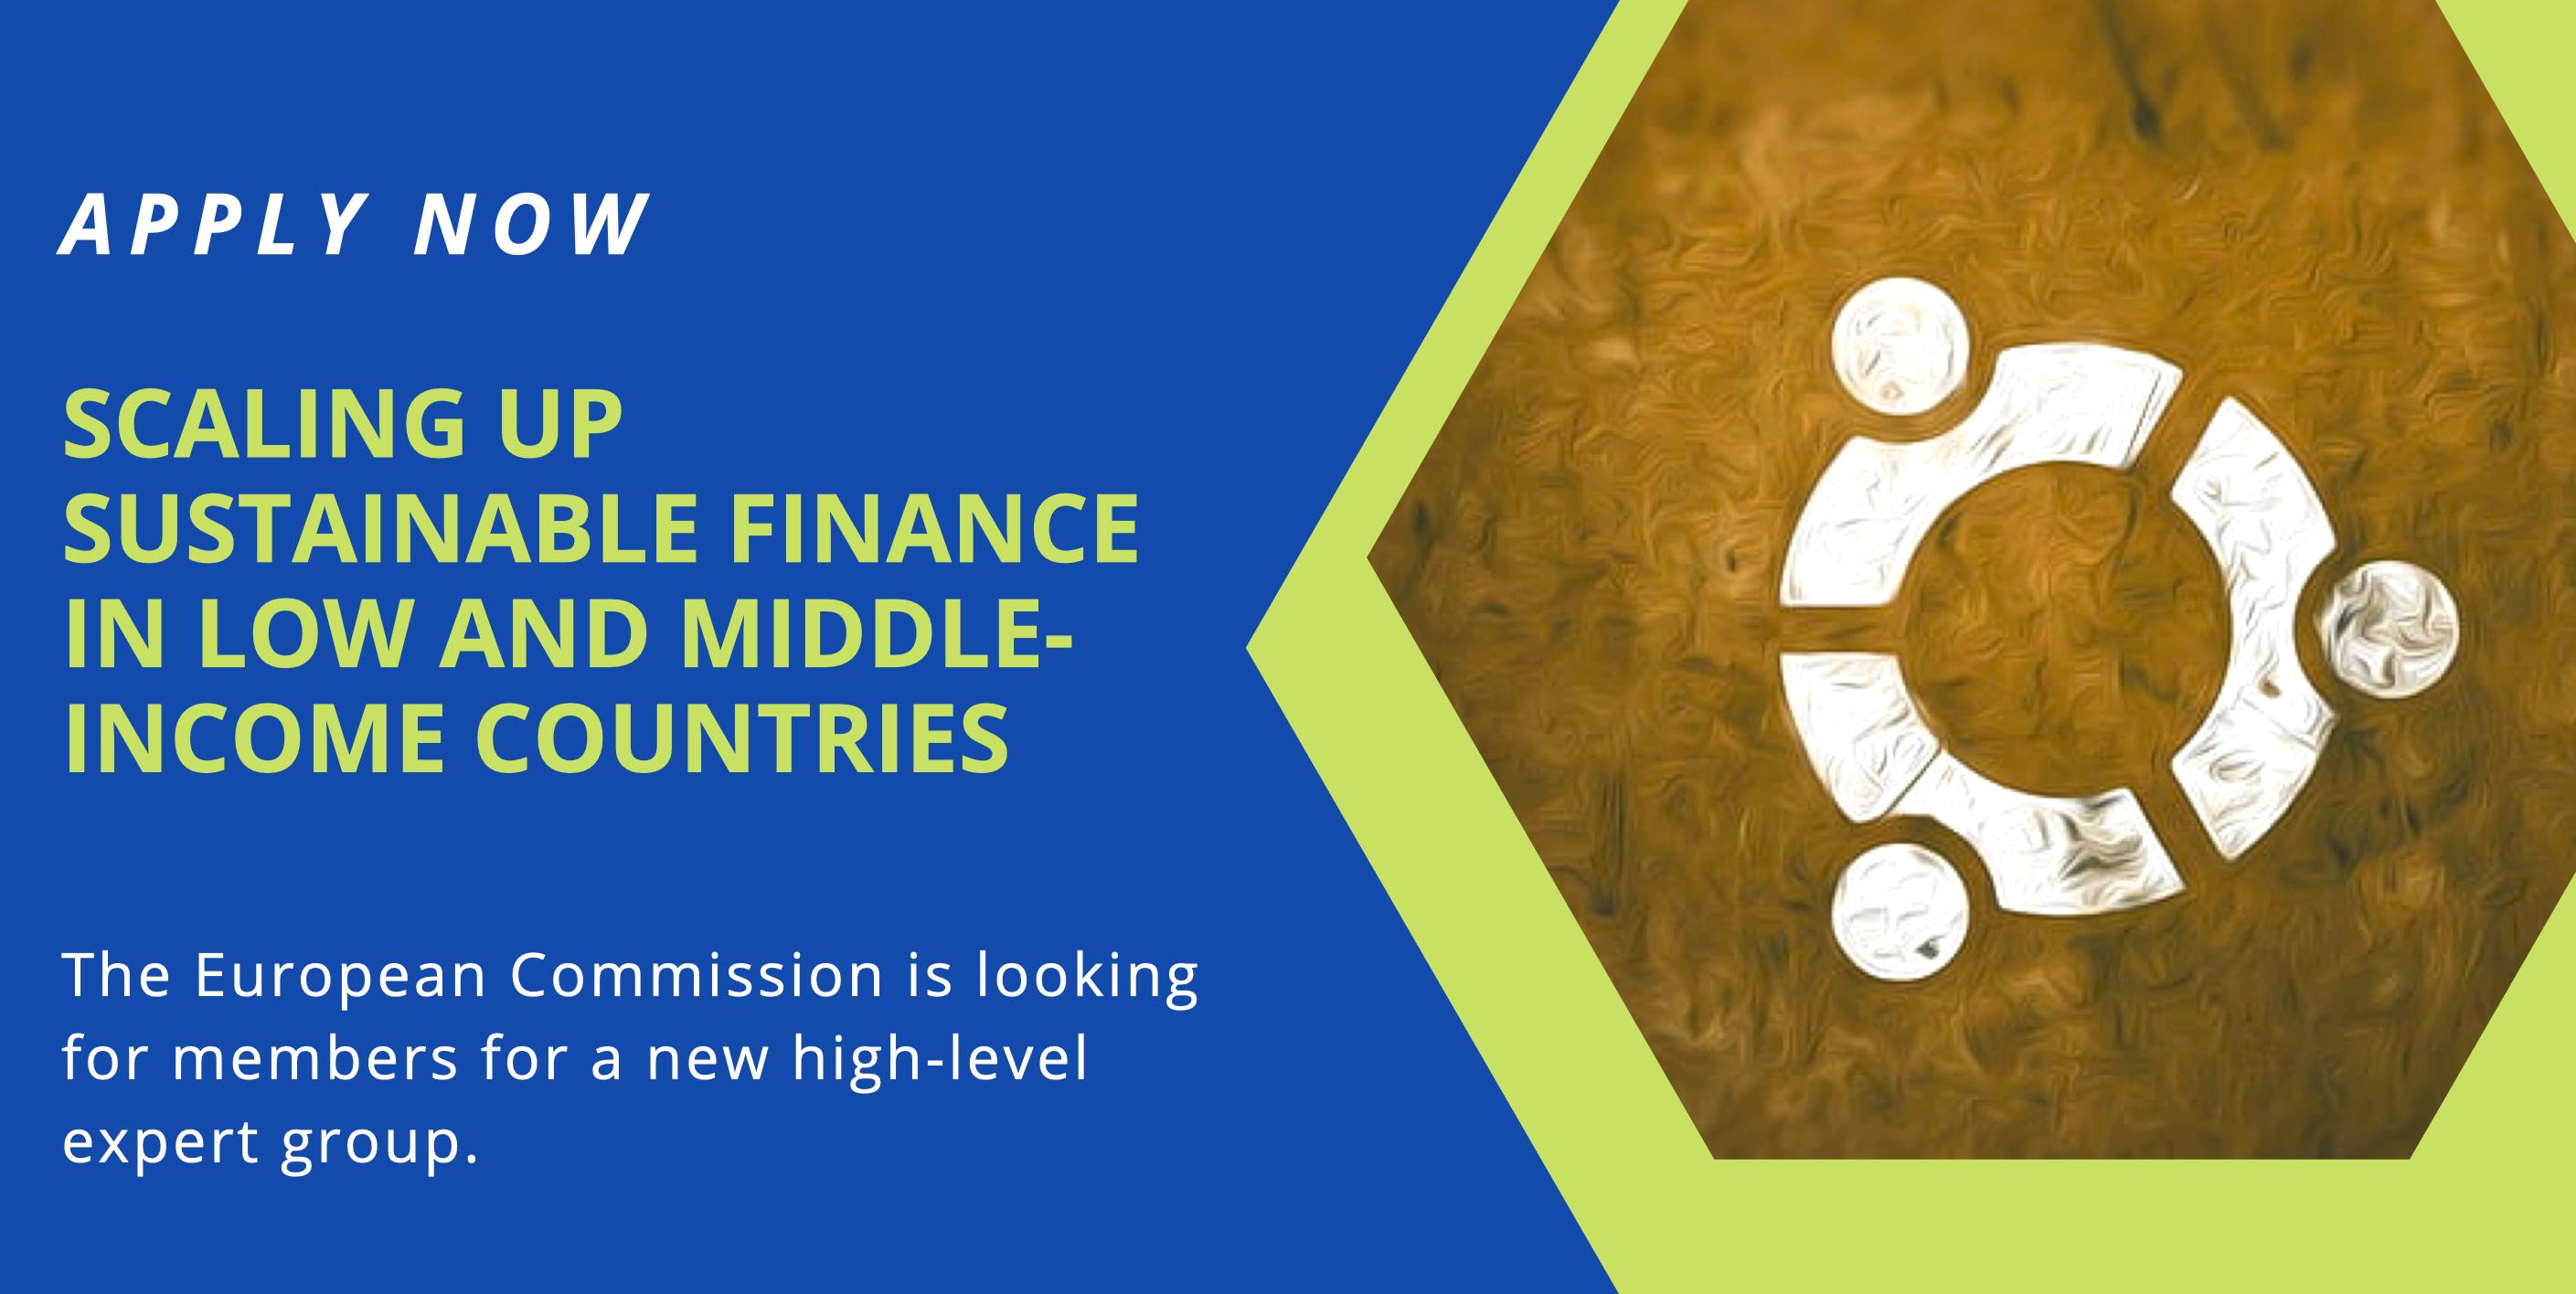 Scaling up Sustainable Finance in Low and Middle-Income Countries